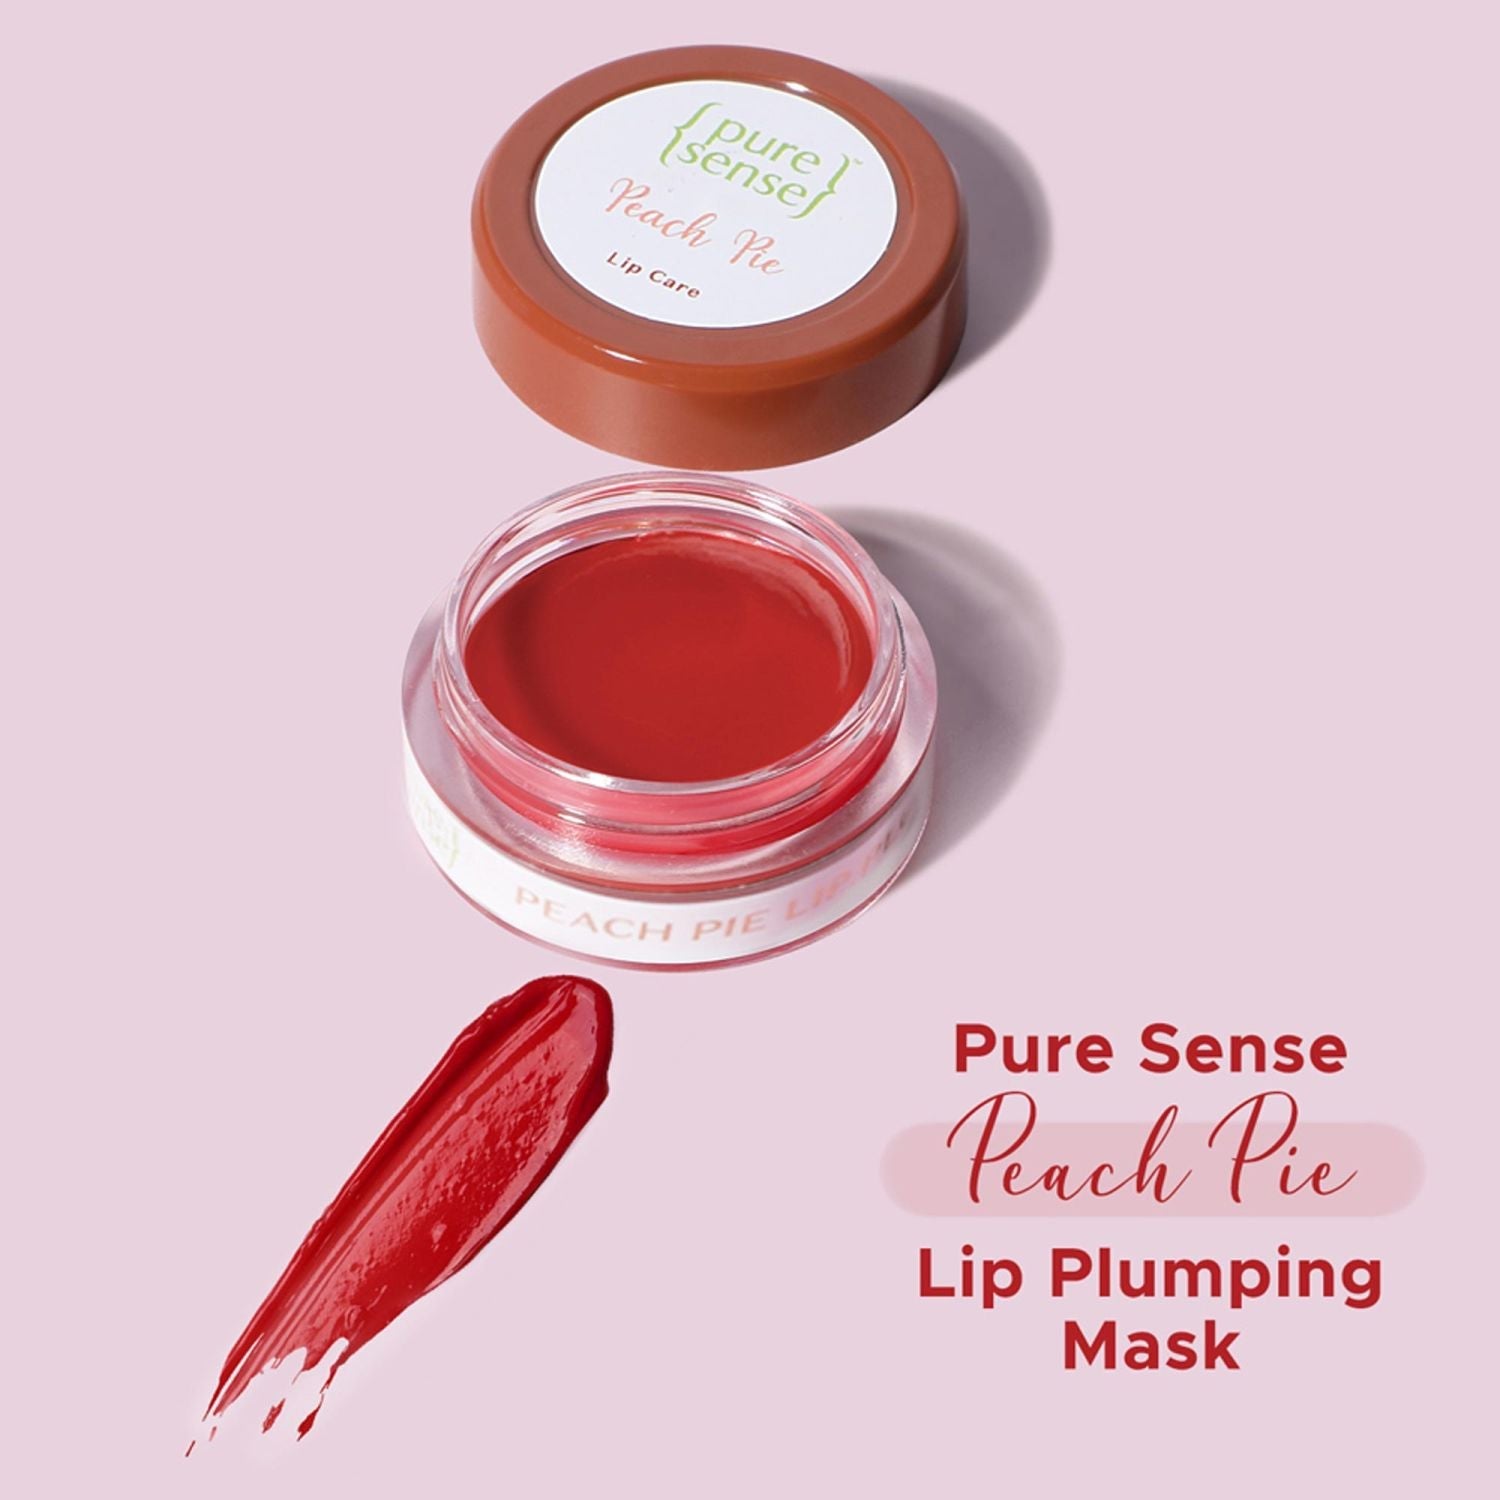 [CRED] Peach Pie Lip Plumping Mask | From the makers of Parachute Advansed | 5ml